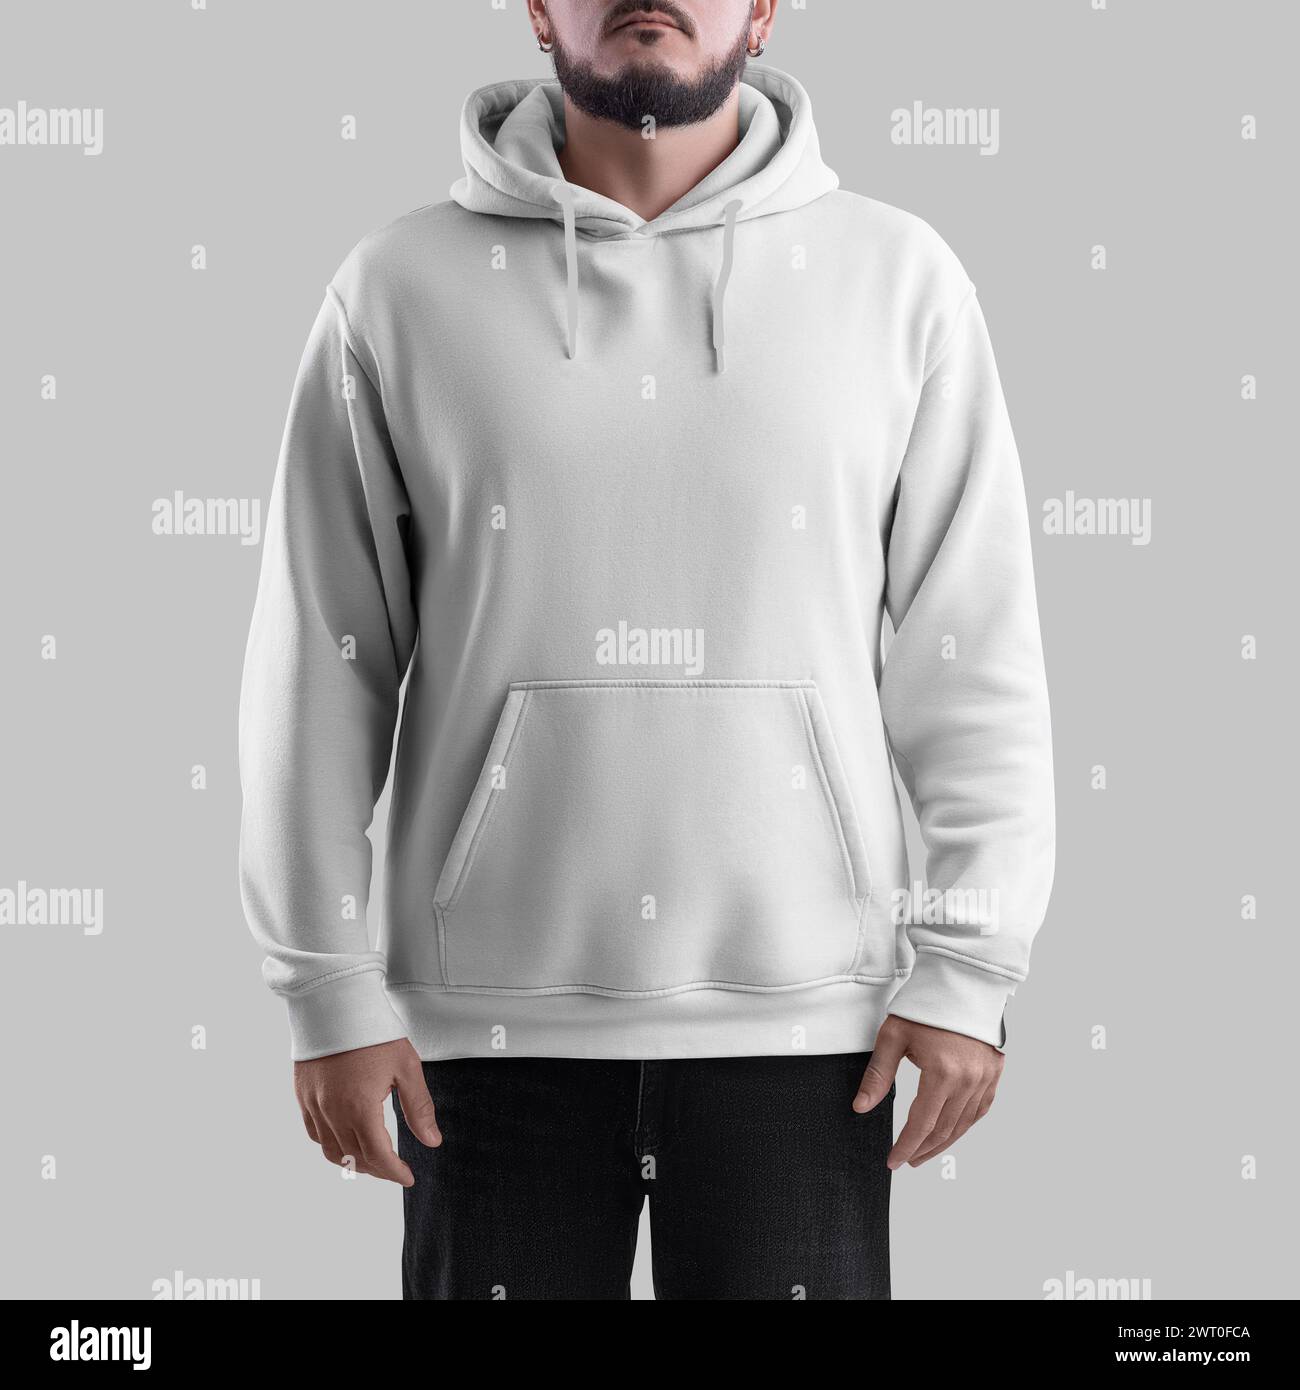 White hoodie mockup on bearded man, oversized sweatshirt with pocket, for design, branding, front view. Trendy casual clothes template isolated on bac Stock Photo